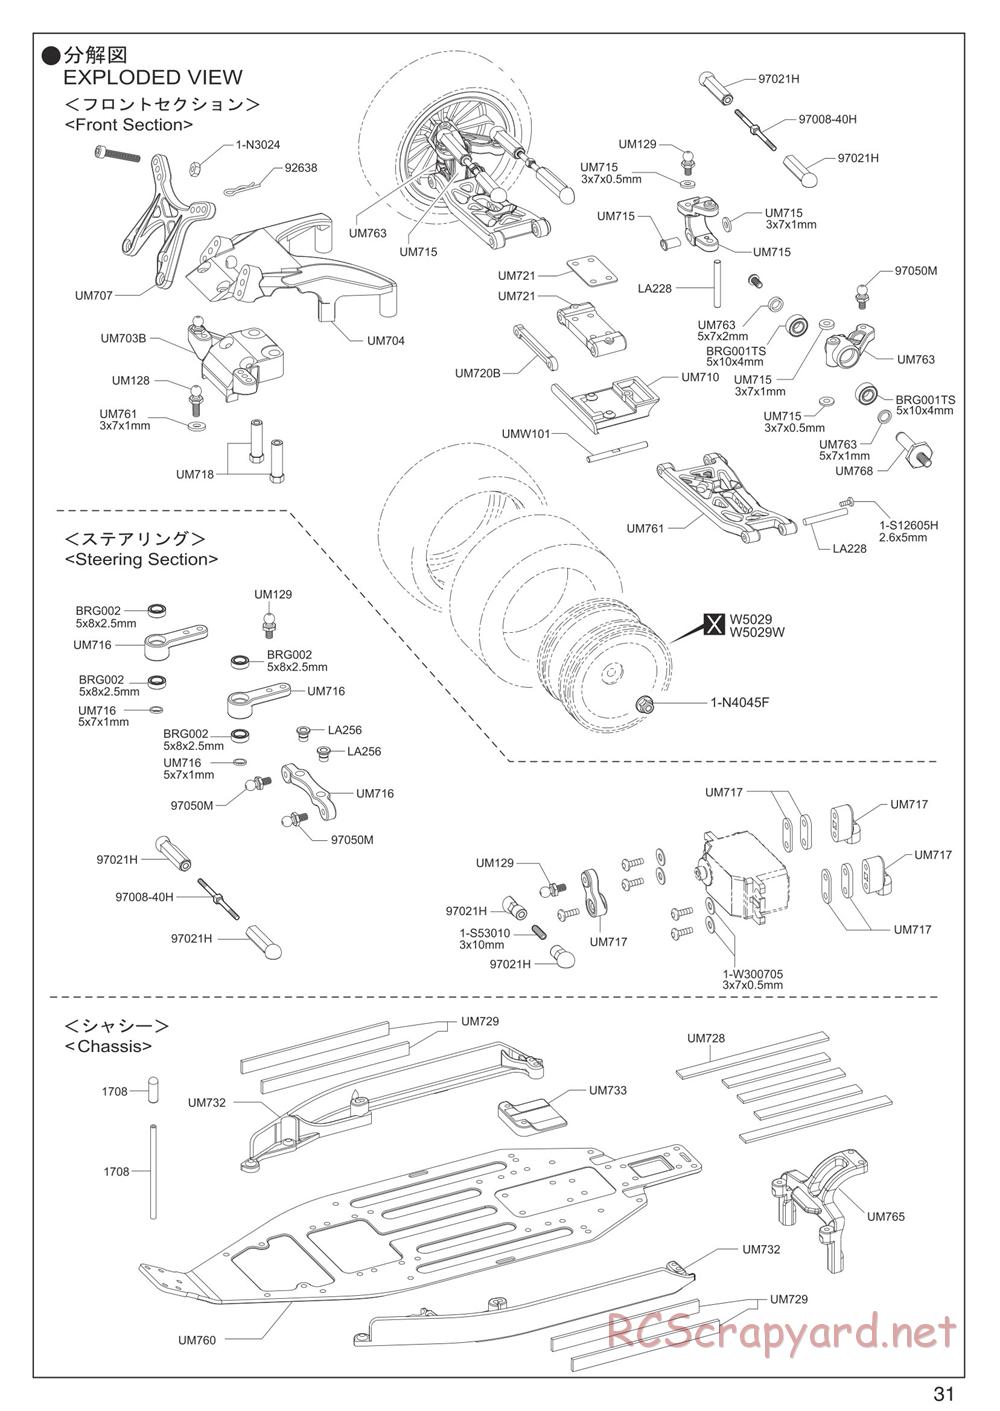 Kyosho - Ultima RB7SS - Exploded Views - Page 1